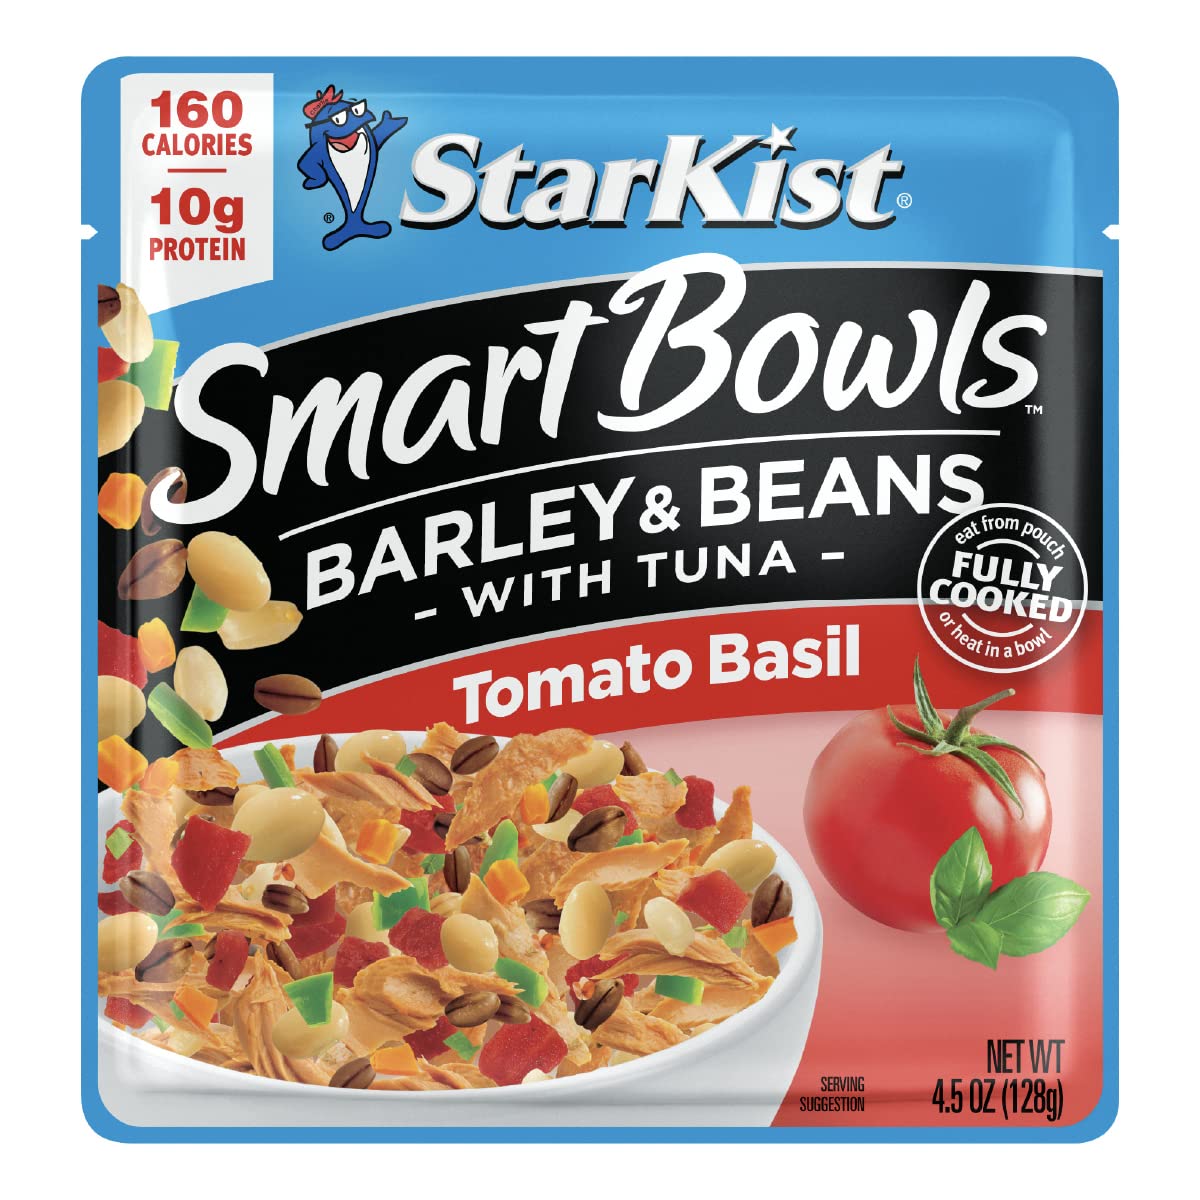 12-Pack 4.5-Oz StarKist Smart Bowls Barley & Beans w/ Tuna (Tomato Basil) $11.40 w/ S&S + Free Shipping w/ Prime or on orders over $35